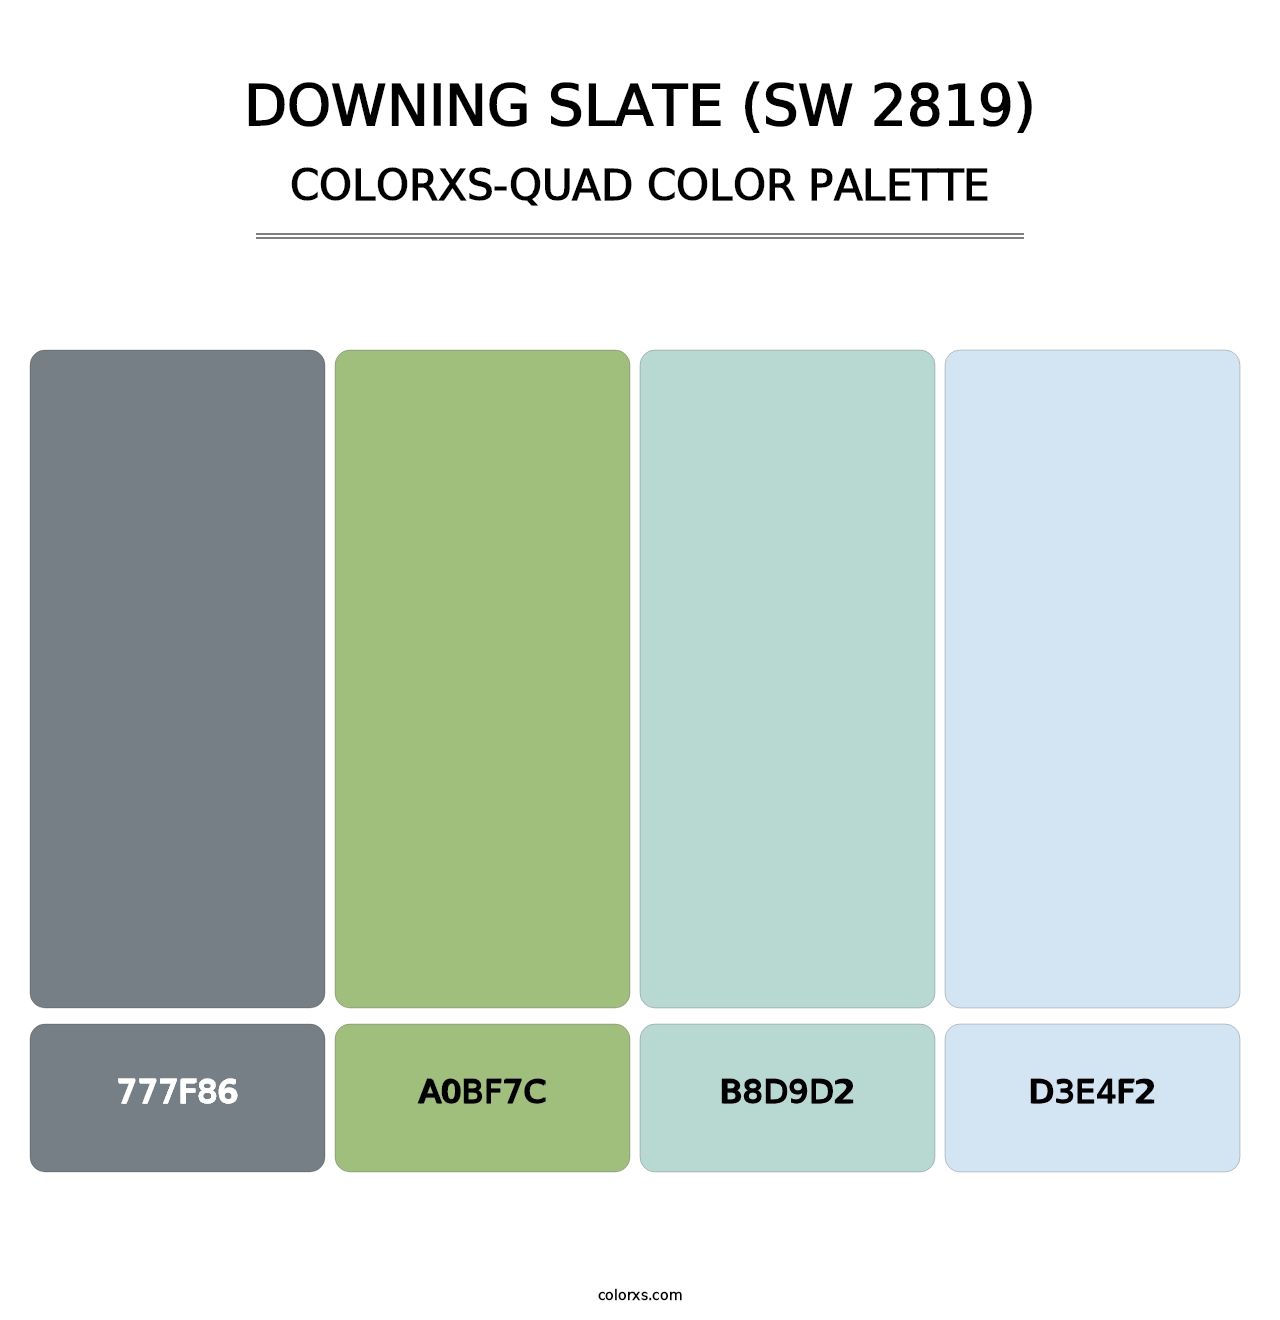 Downing Slate (SW 2819) - Colorxs Quad Palette